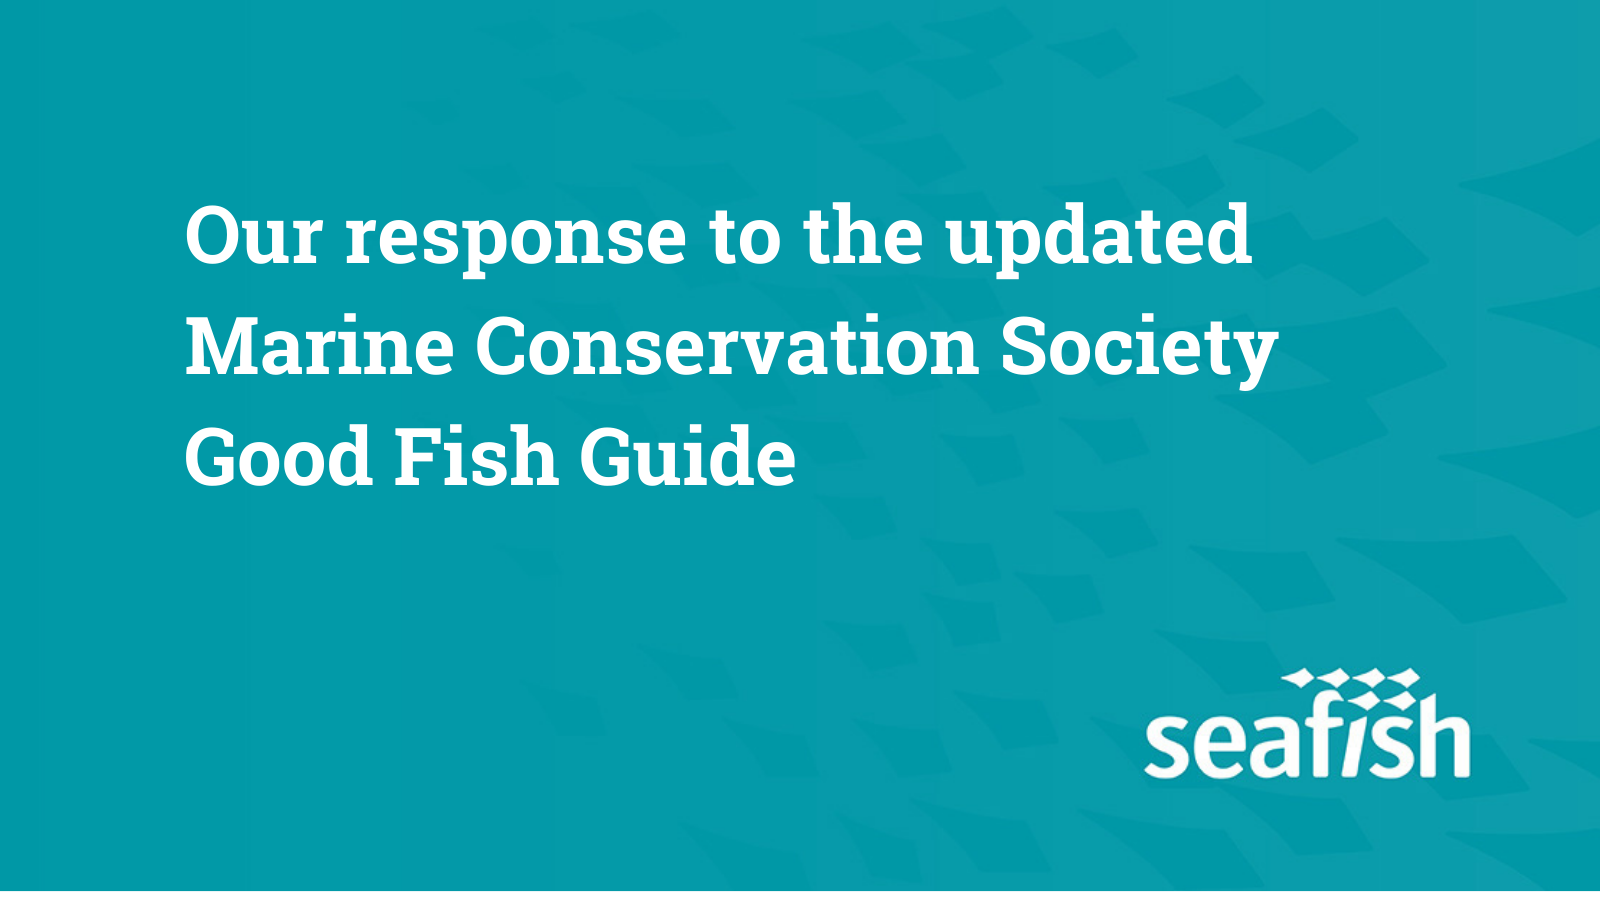 Our response to the updated Marine Conservation Society Good Fish Guide